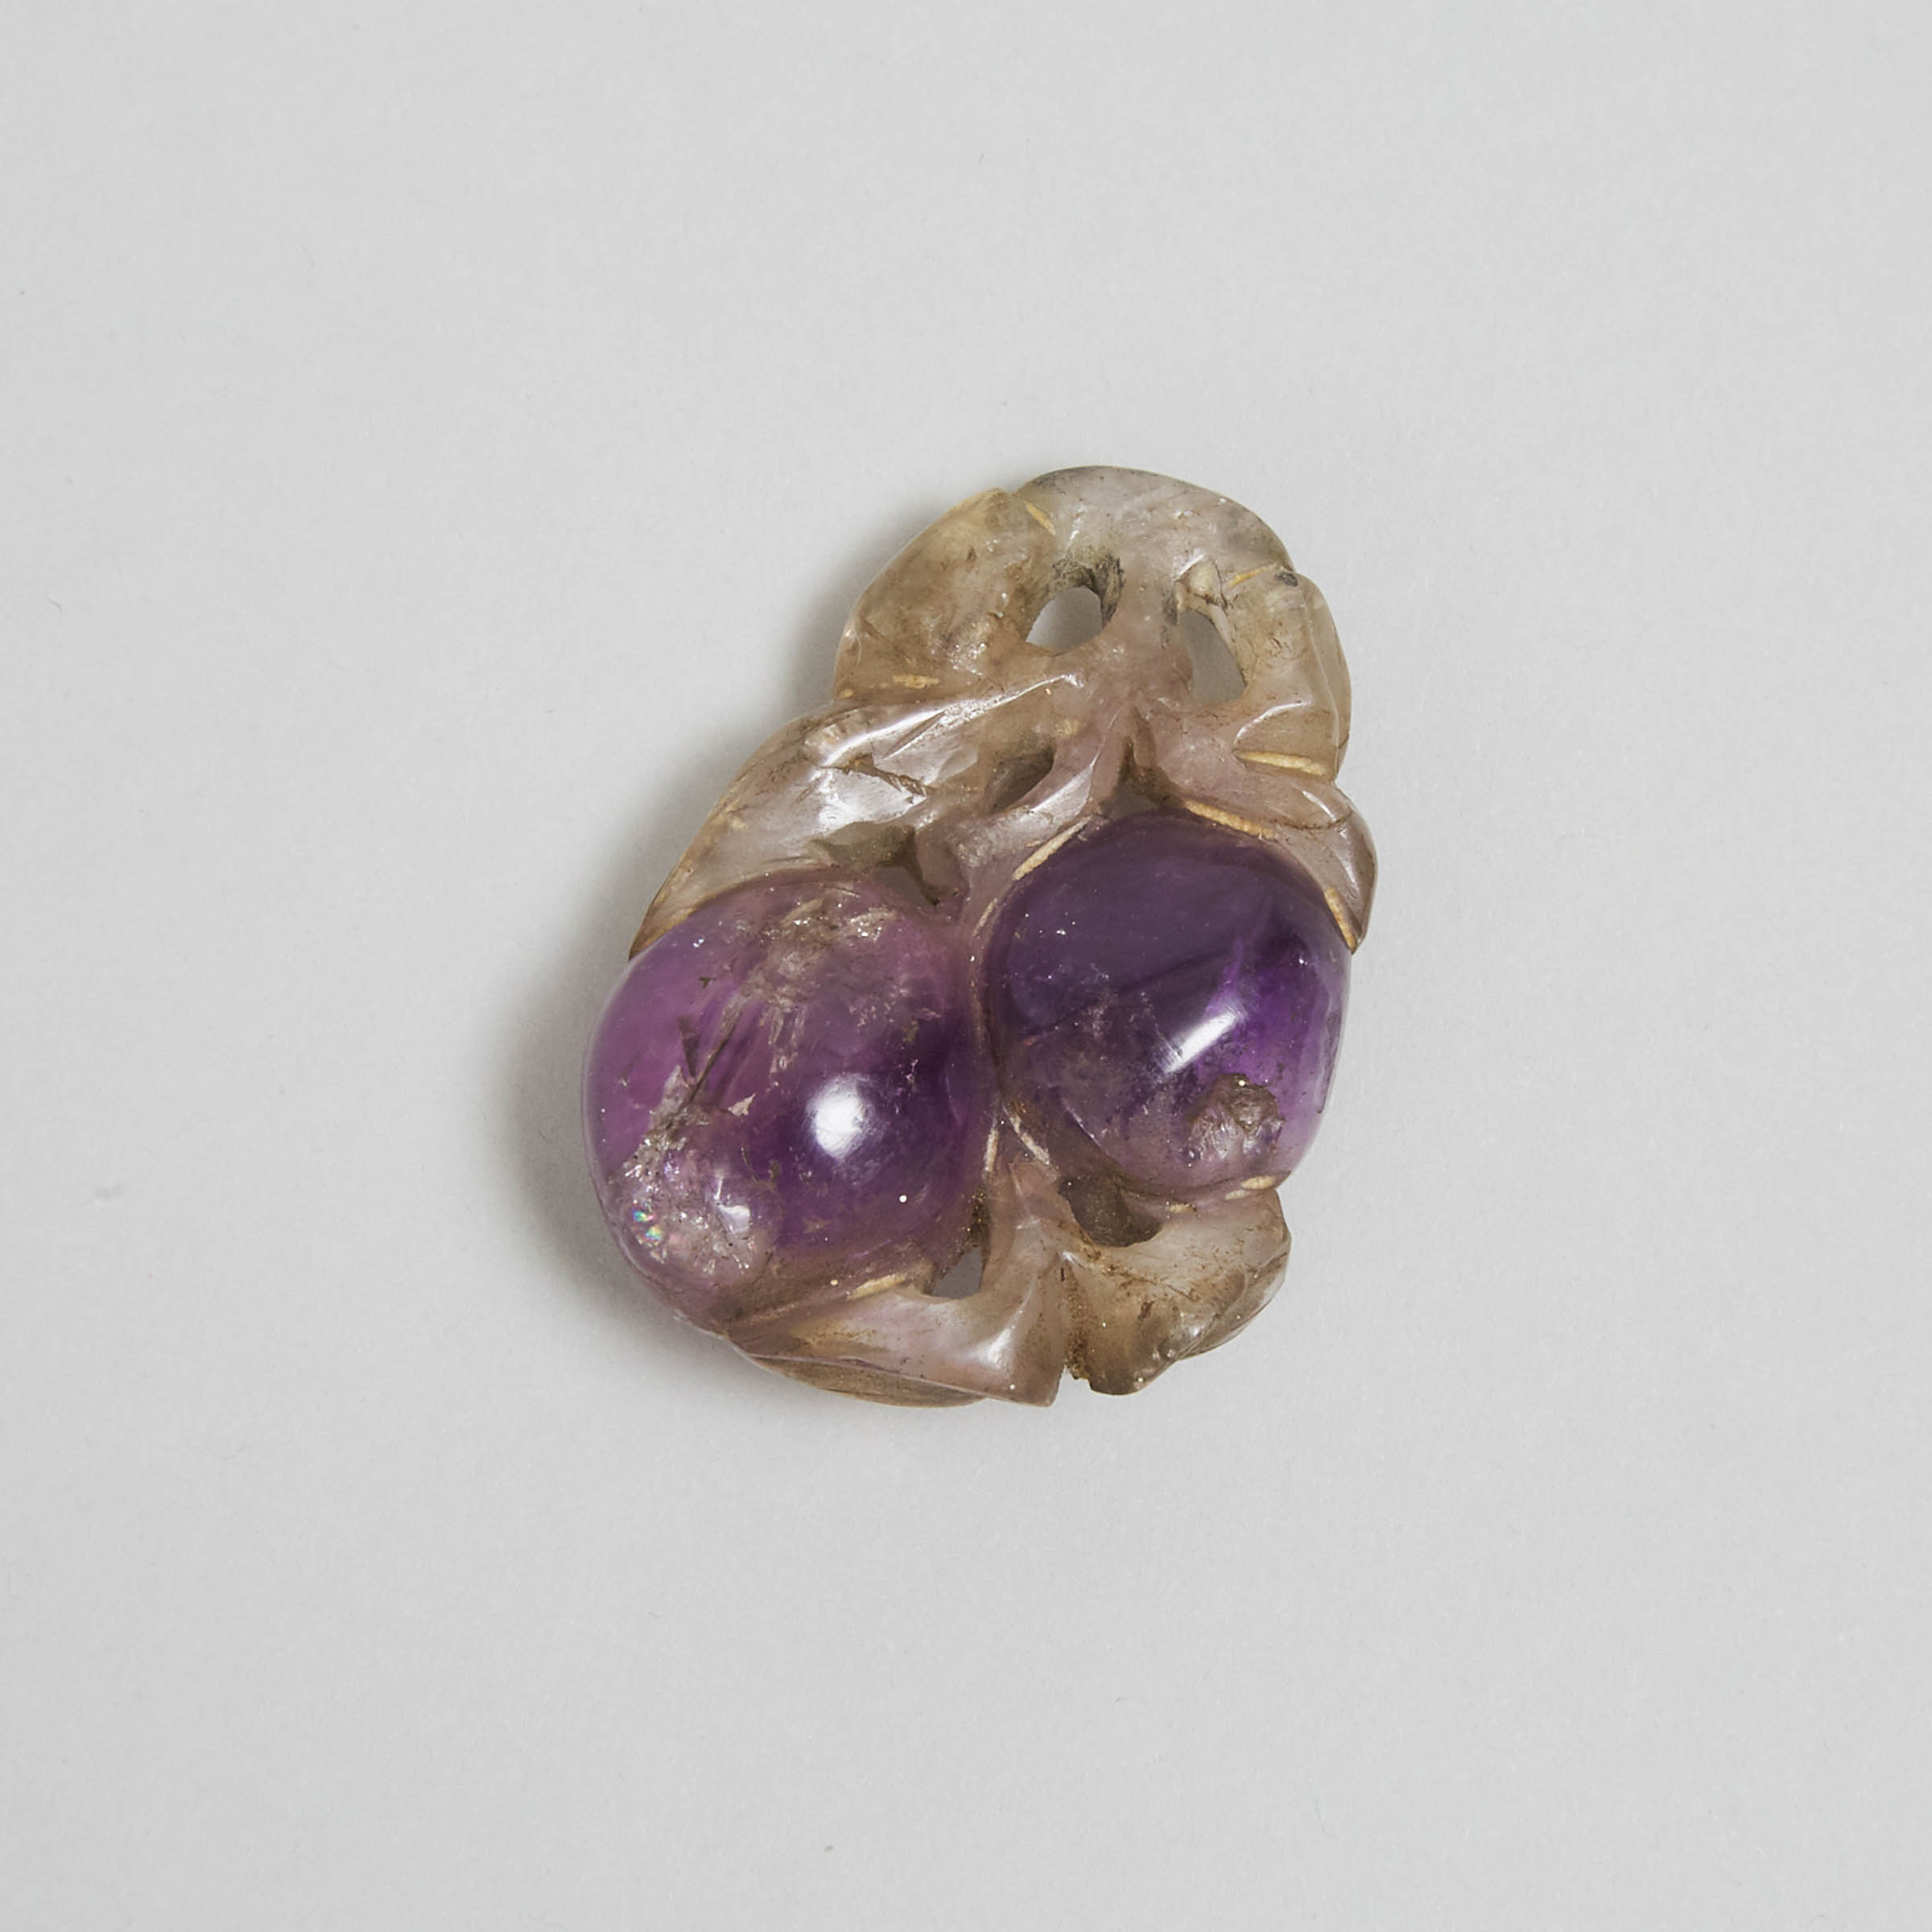 Small Chinese Carved Fluorite Double Peach Form Group, 20th century